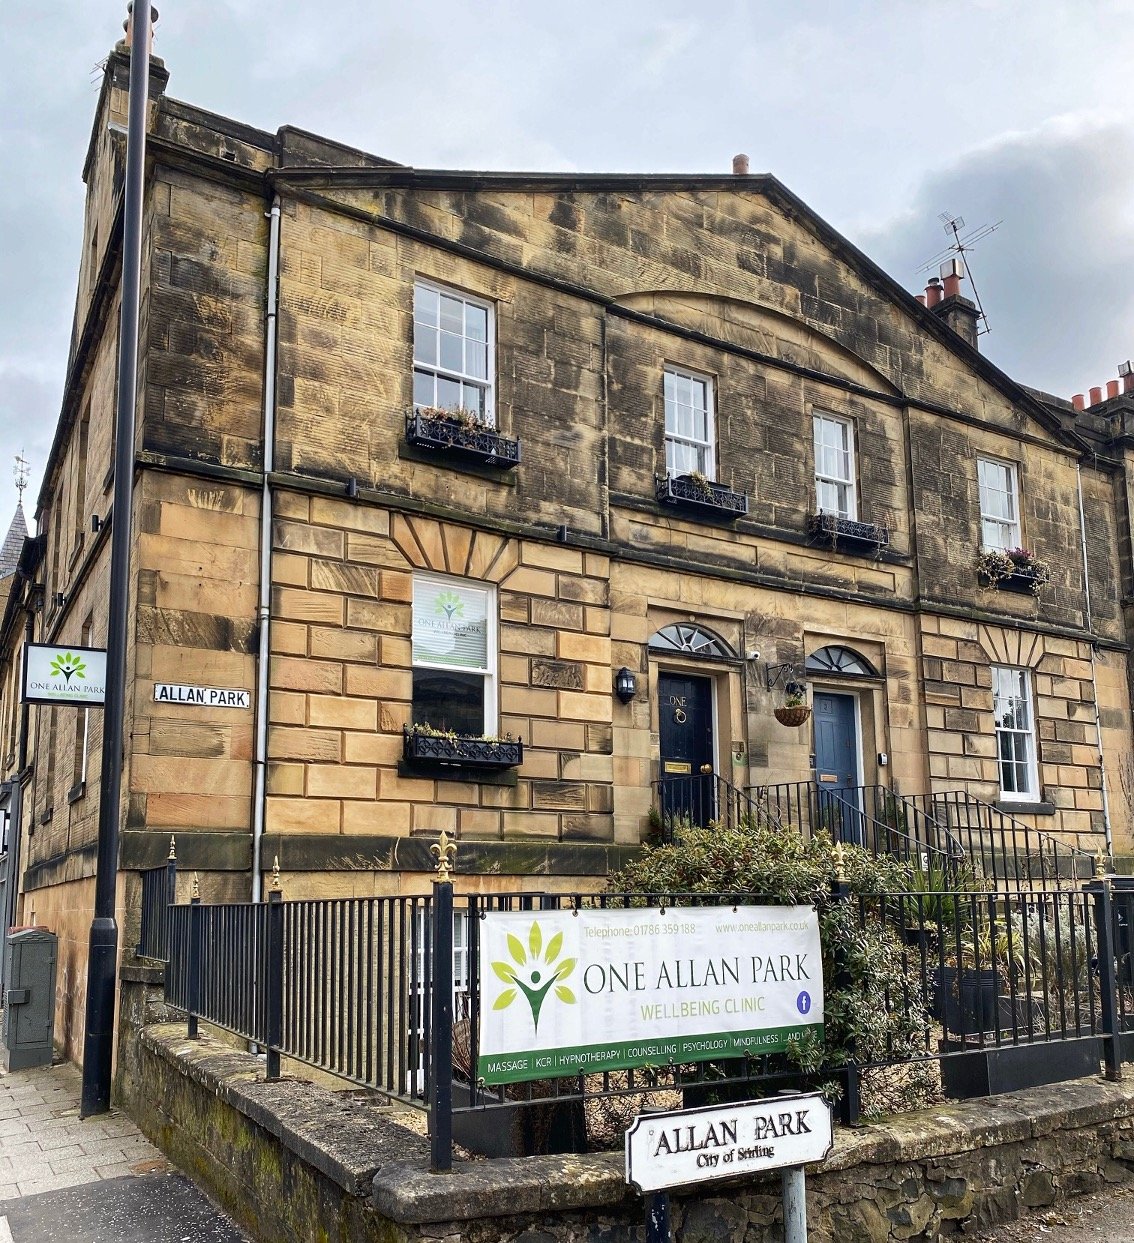 Scotland’s first medical cannabis clinic registered with Healthcare Improvement Scotland receives rating